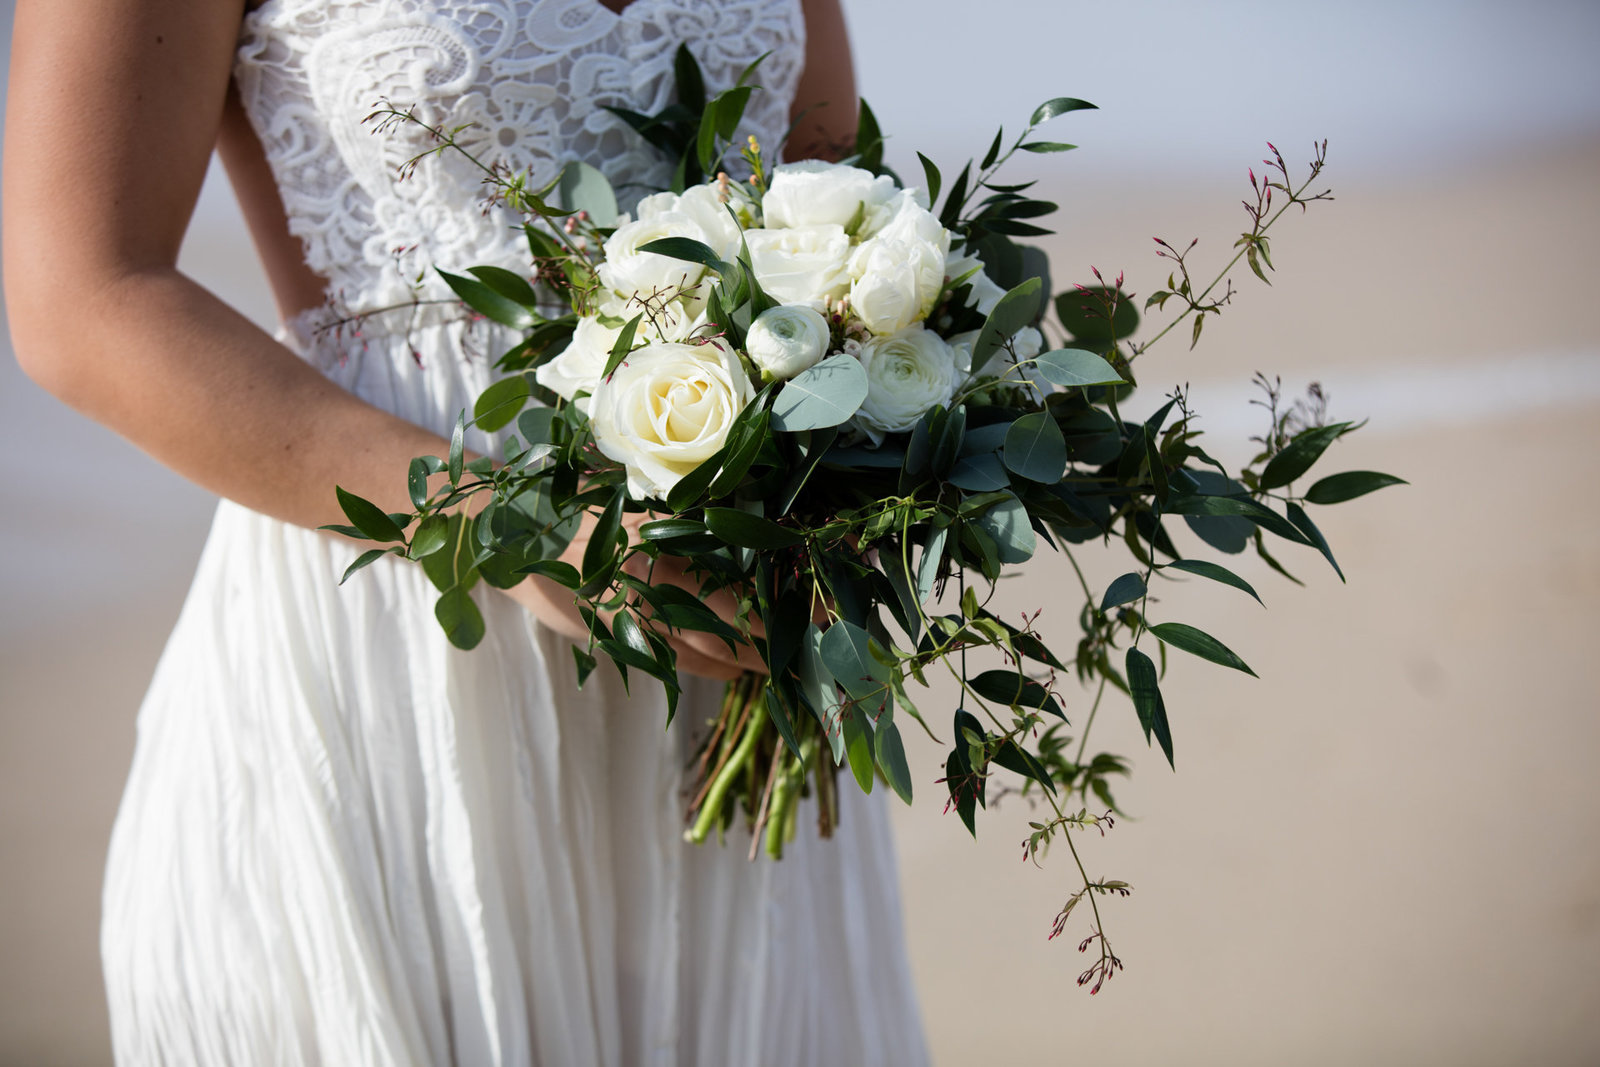 The bouquet is held by the bride in stunning beach engagement session